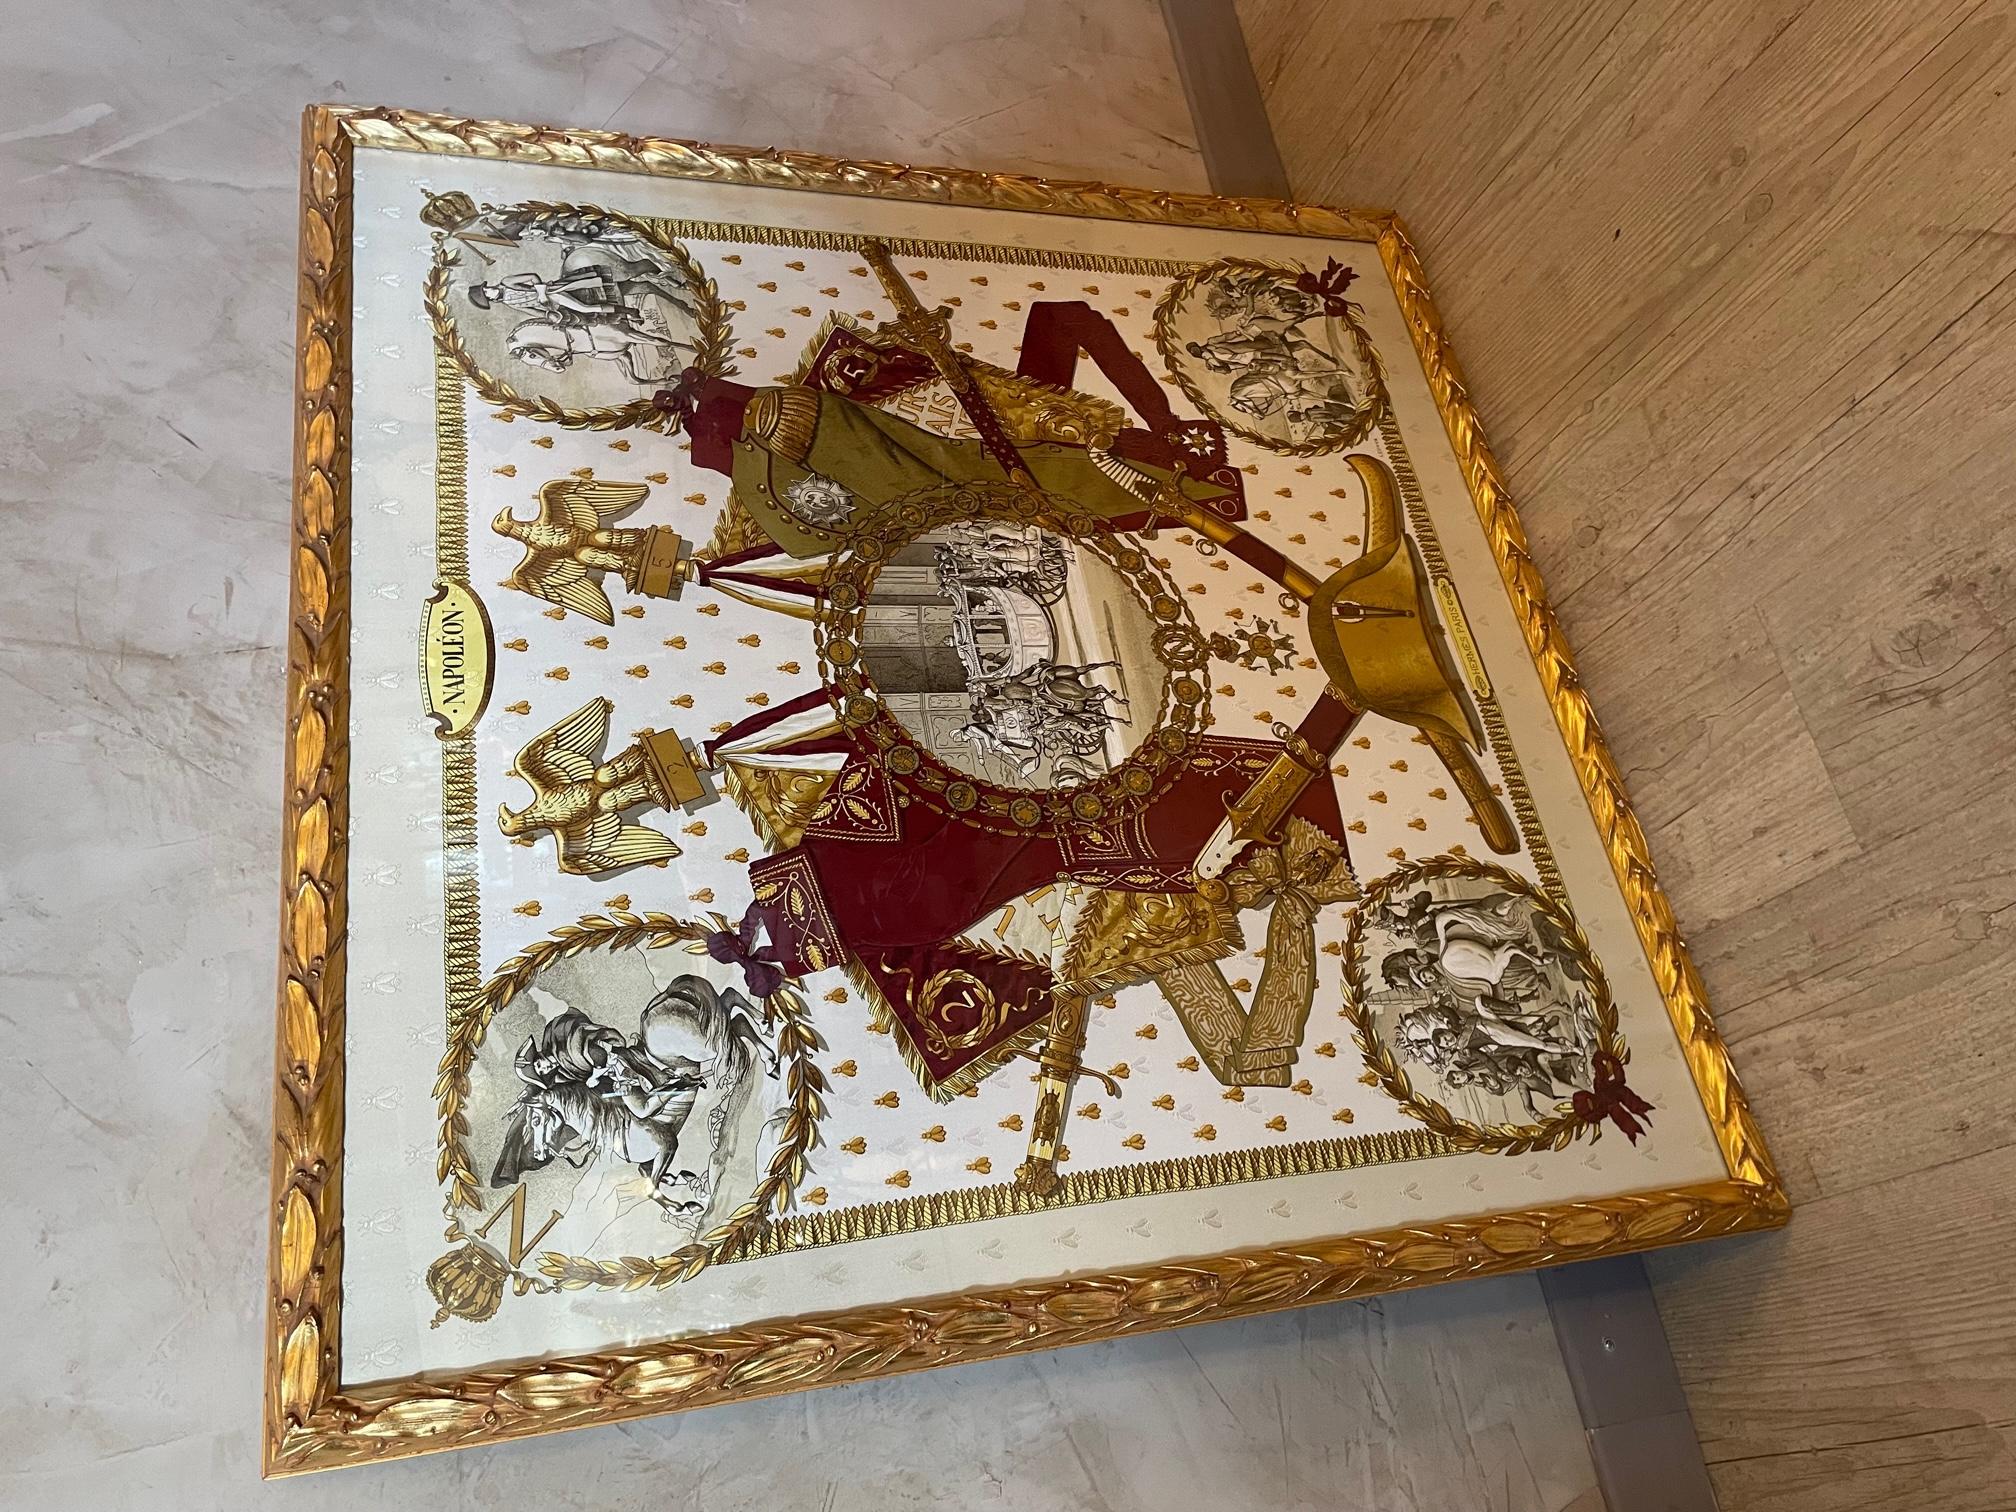 Exceptional Hermes silk scarf designed by Philippe Ledoux (signature on the right bottom). A lot of symbol are representing : 
There is a cocked hat, legion of honor, frock coat, eagle, bees.
In the center we can see the representation of the